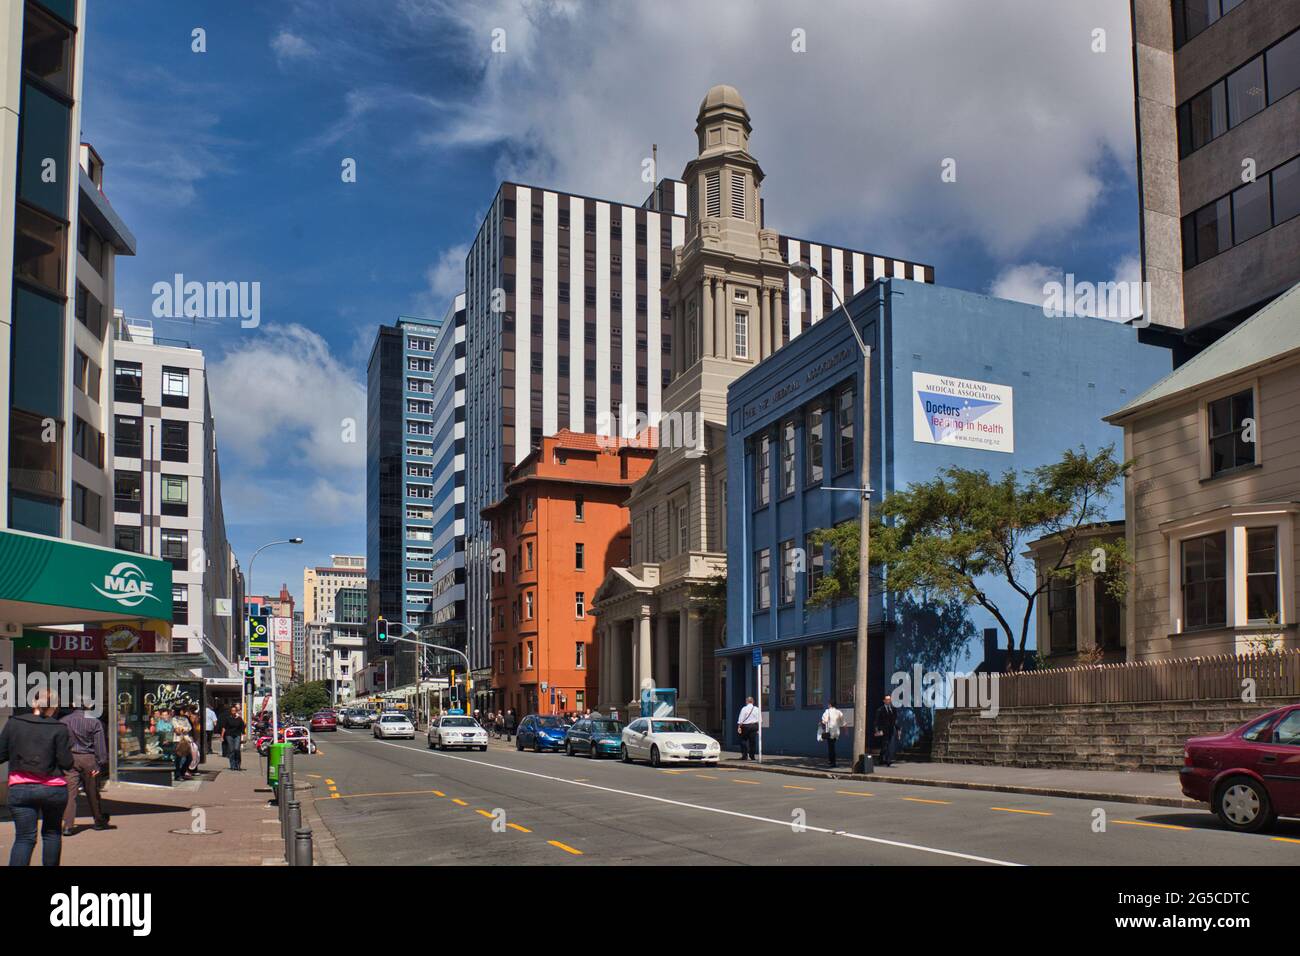 A street scene view with cars and shop fronts in Wellington, North Island, New Zealand Stock Photo